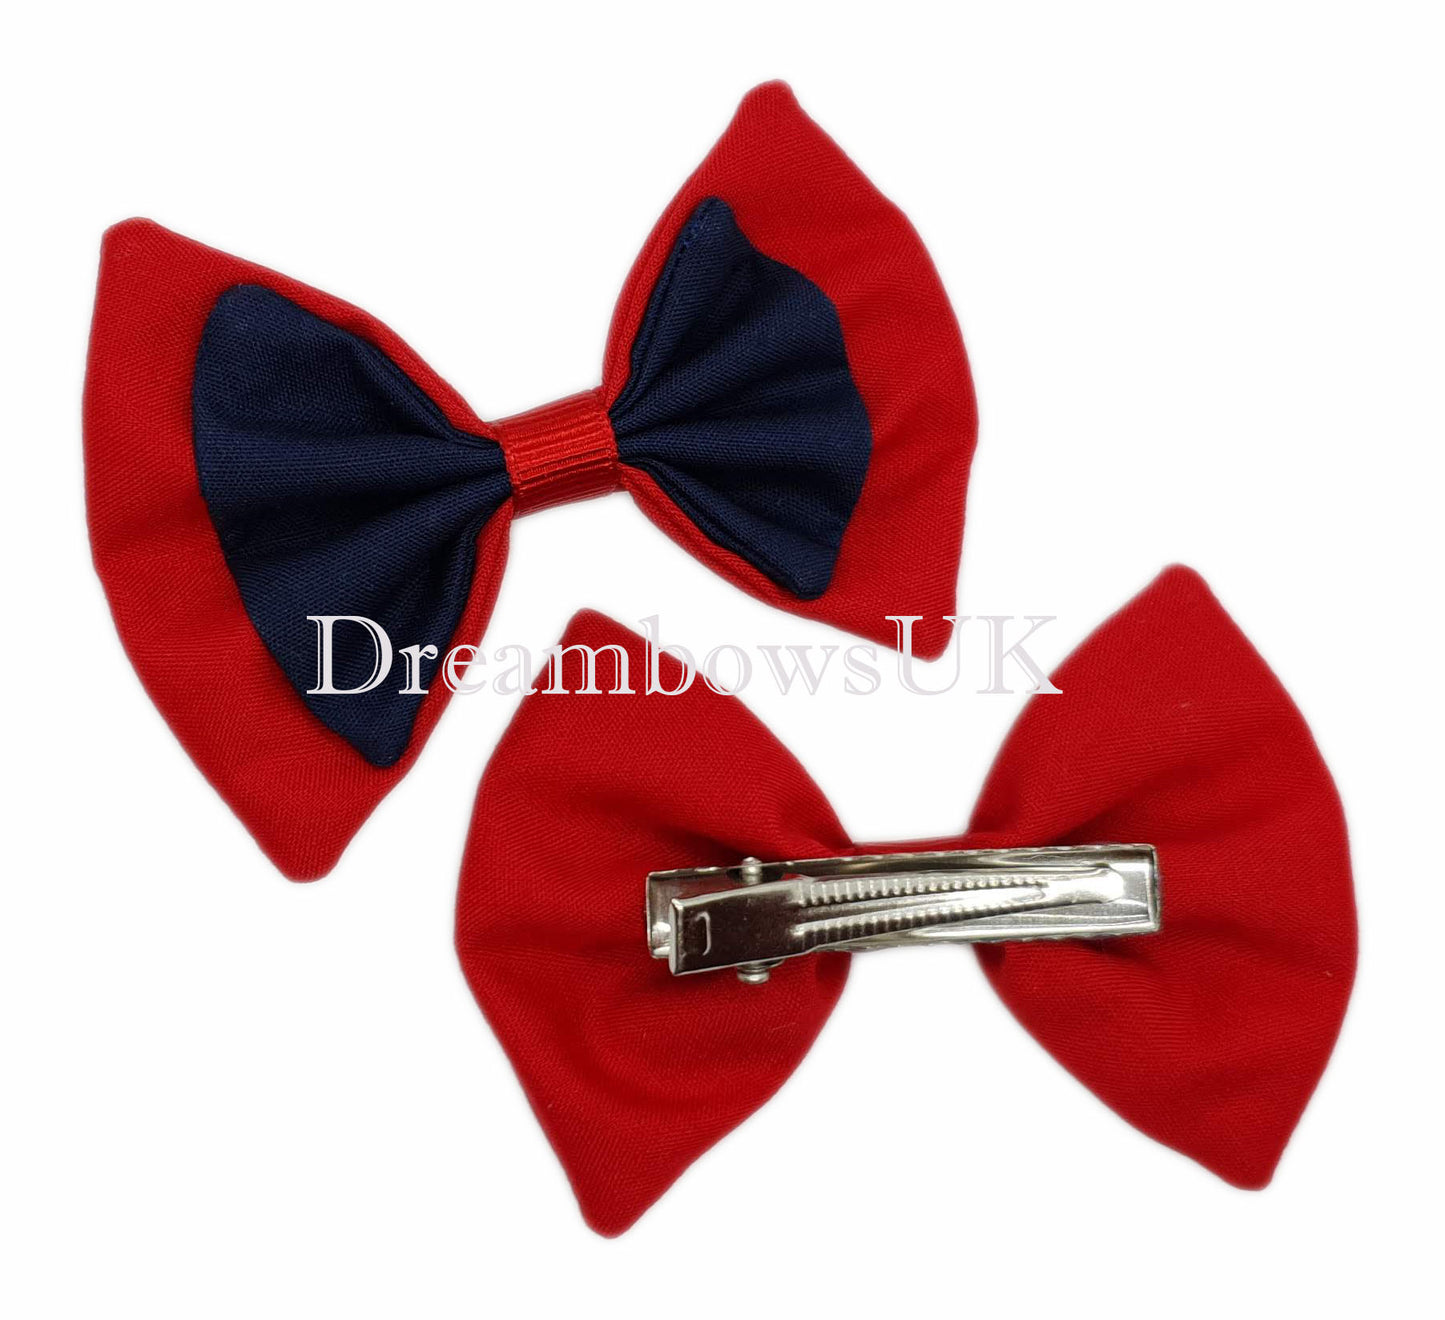 2x Navy blue and red fabric hair bows